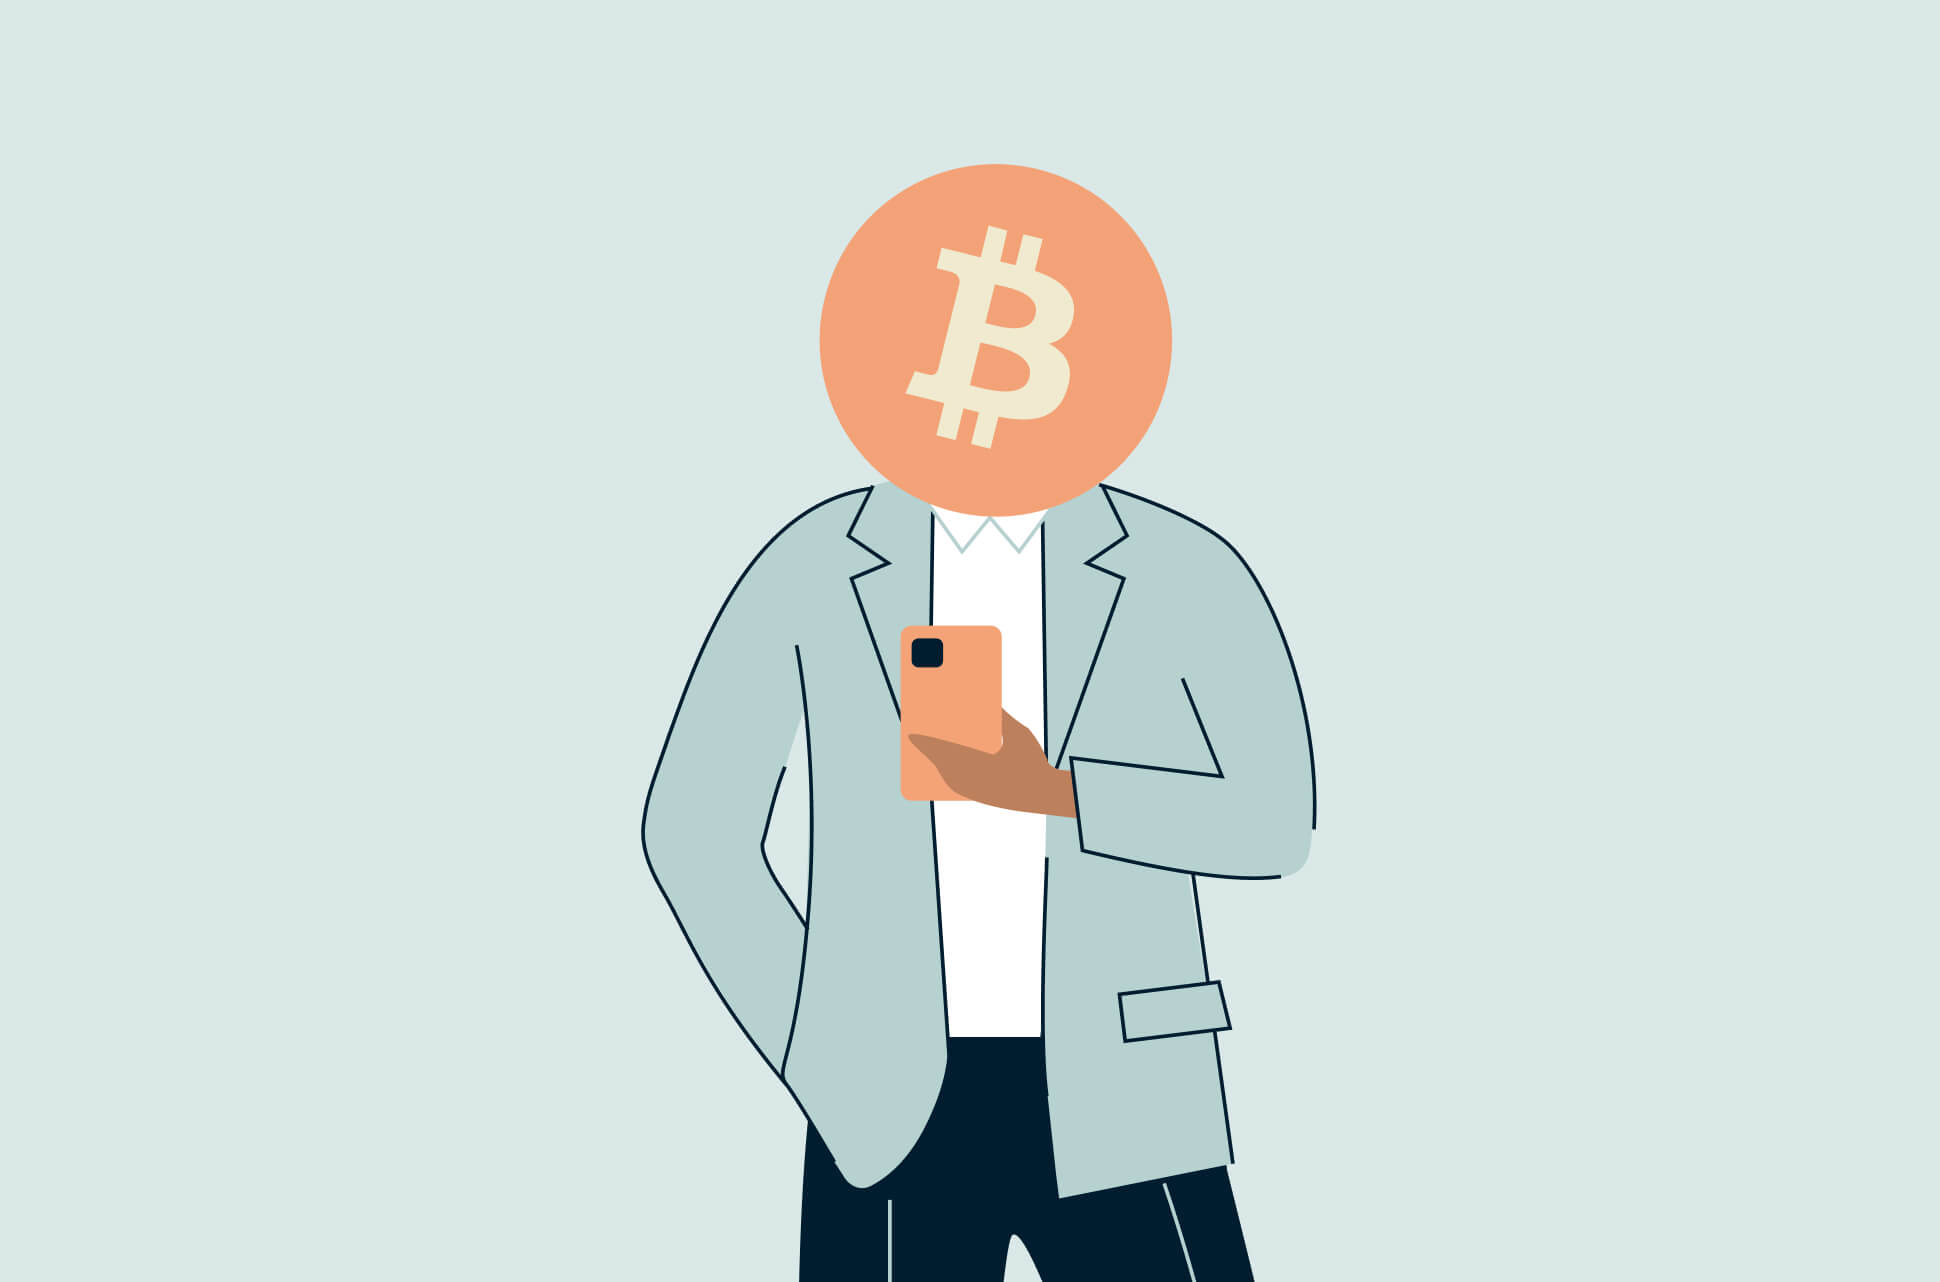 Guest Post by family-gadgets.ru: How to Buy Bitcoin Anonymously Without ID | CoinMarketCap